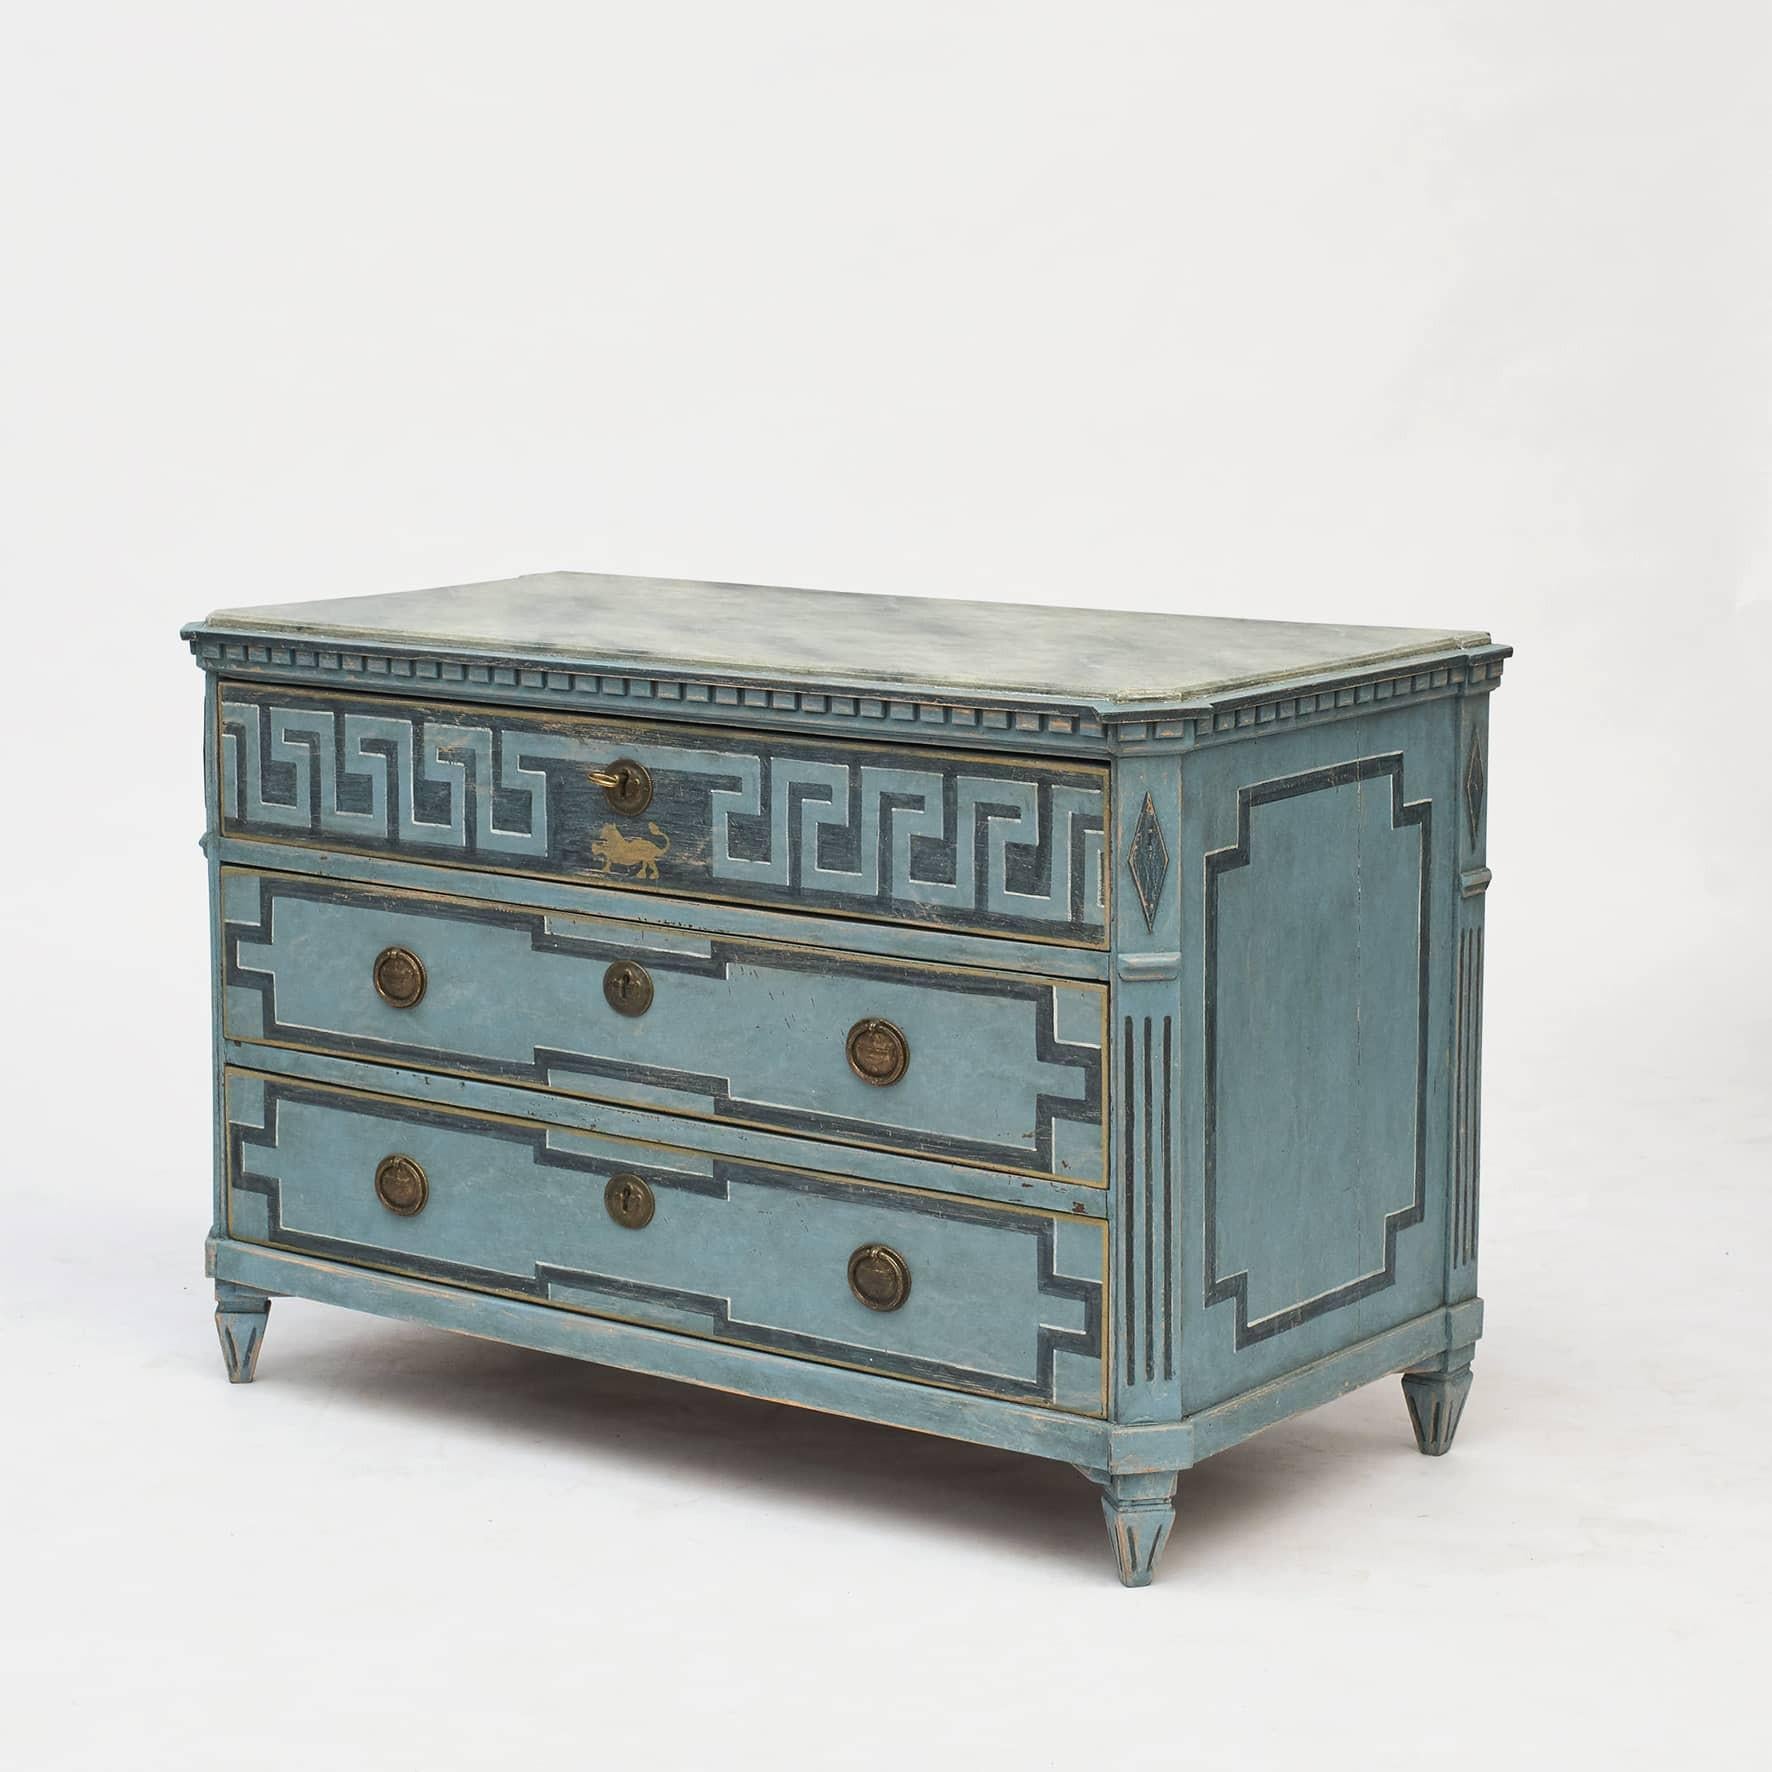 A large decorative Swedish Gustavian style chest of drawers painted in blue shades. Wooden gray faux marbled tabletop.
Three drawer, upper drawer decorated with 